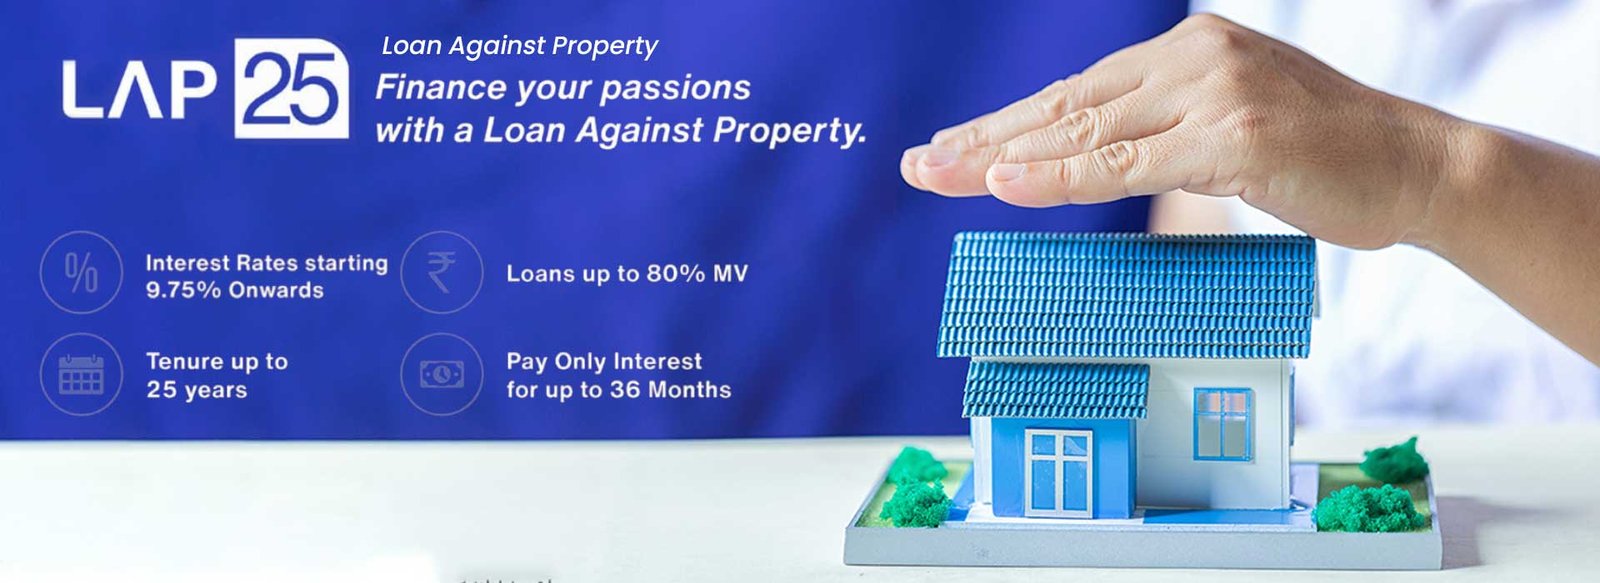 Loan Against Property Images